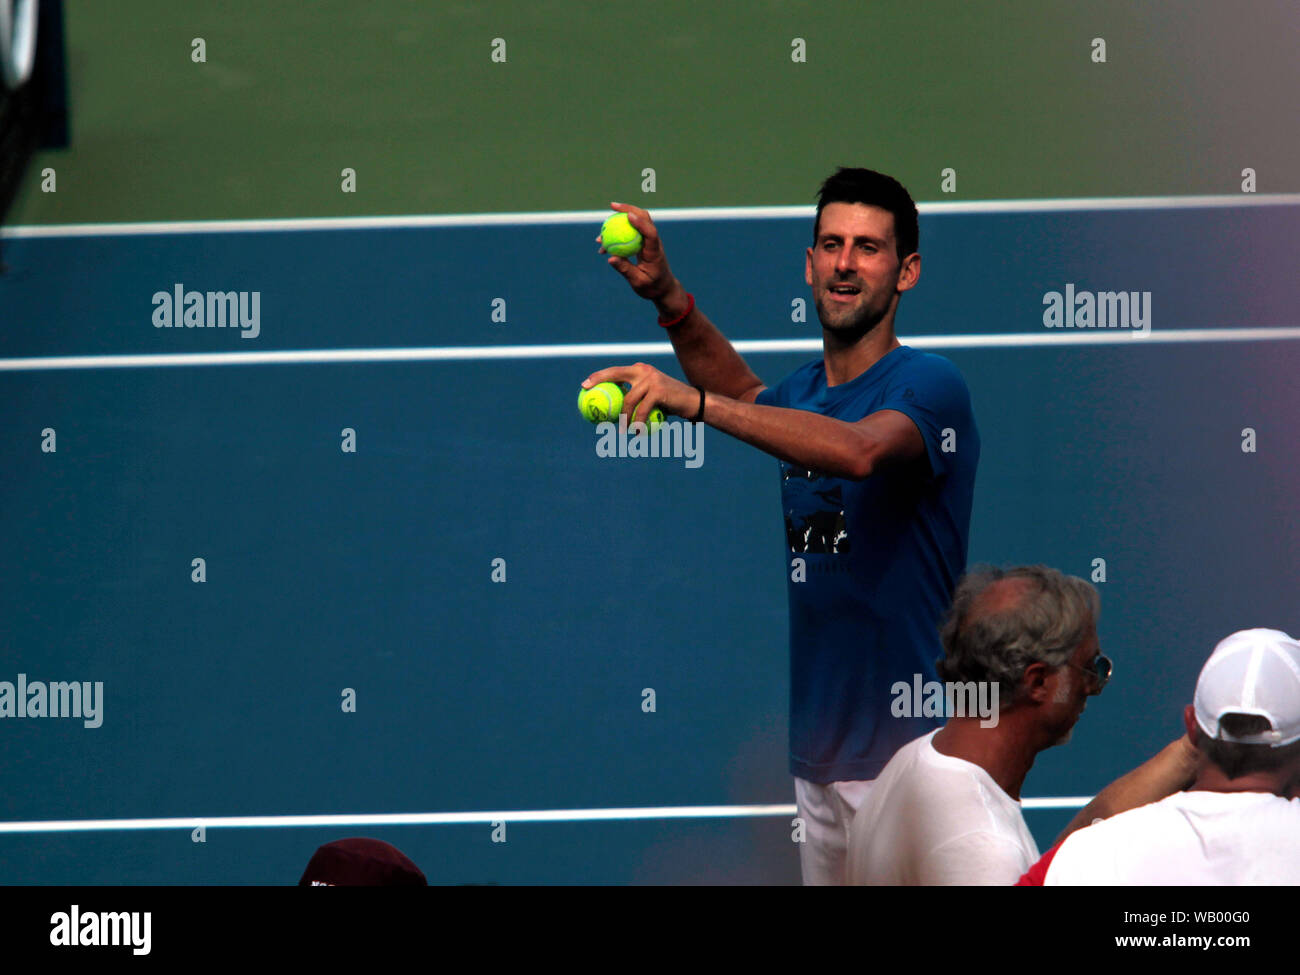 Flushing Meadows, New York, United States - 21 August 2019. Novak Djokovic of Serbia throws some balls to fans in the stands after practicing at the National Tennis Center in Flushing Meadows, New York in preparation for the US Open which begins next Monday. Credit: Adam Stoltman/Alamy Live News Stock Photo